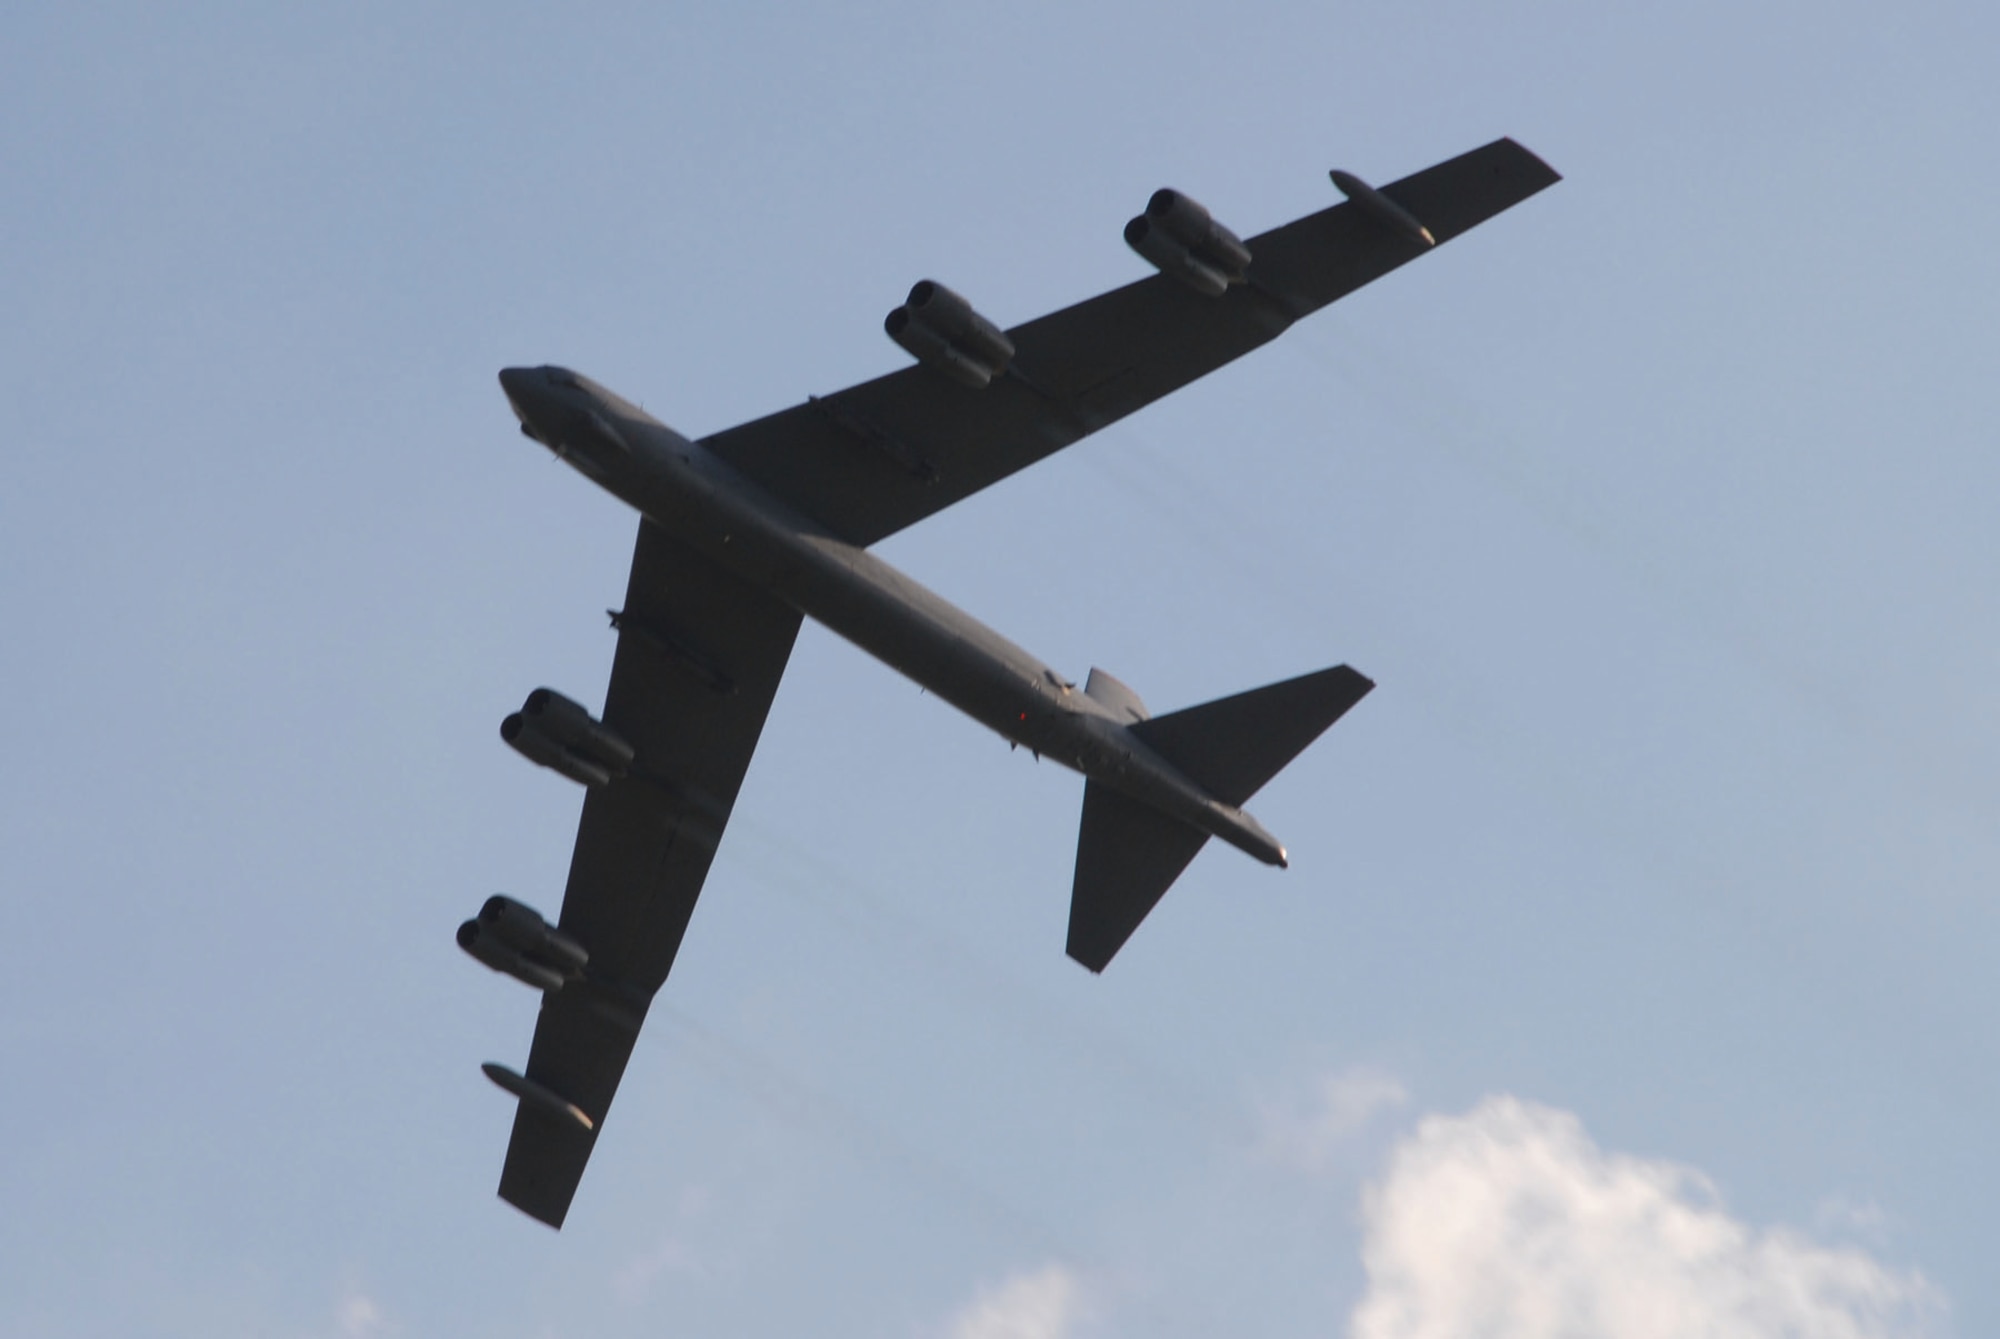 During the aerial demonstration for the National Security Forum Wednesday, a B-52 Stratofortress conducts a fly-over of Maxwell for attendees of the forum. The B-52 was joined in the fly-overs by a B-1 Lancer and a B-2 Spirit. (U.S. Air Force photo/Jamie Pitcher)